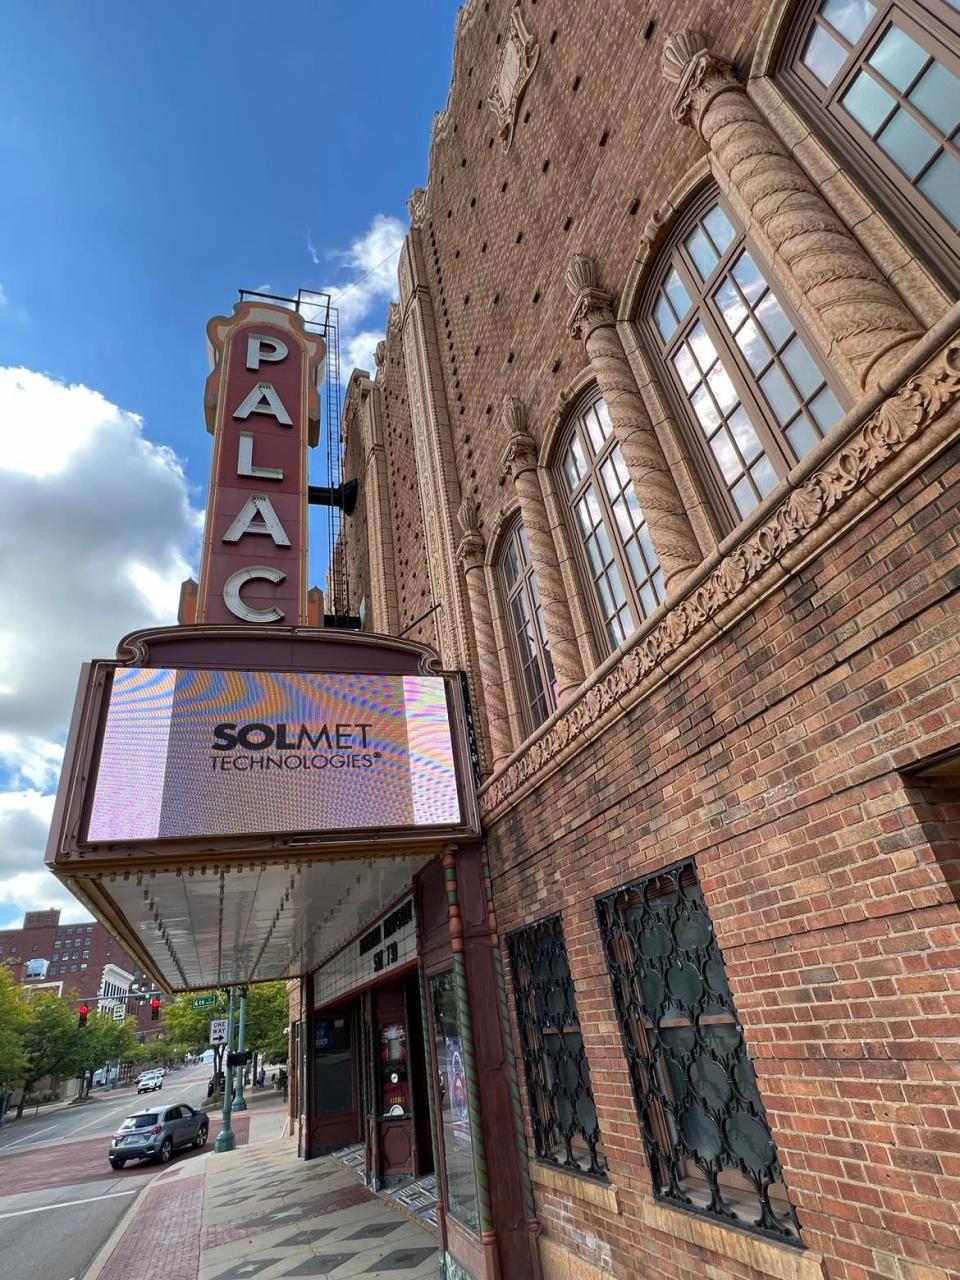 The Canton Palace Theatre announced a capital campaign to help fund a $16 million renovation and expansion project of the historic venue. Plans call for unveiling the improvements in November of 2026 to correspond with its 100th anniversary.